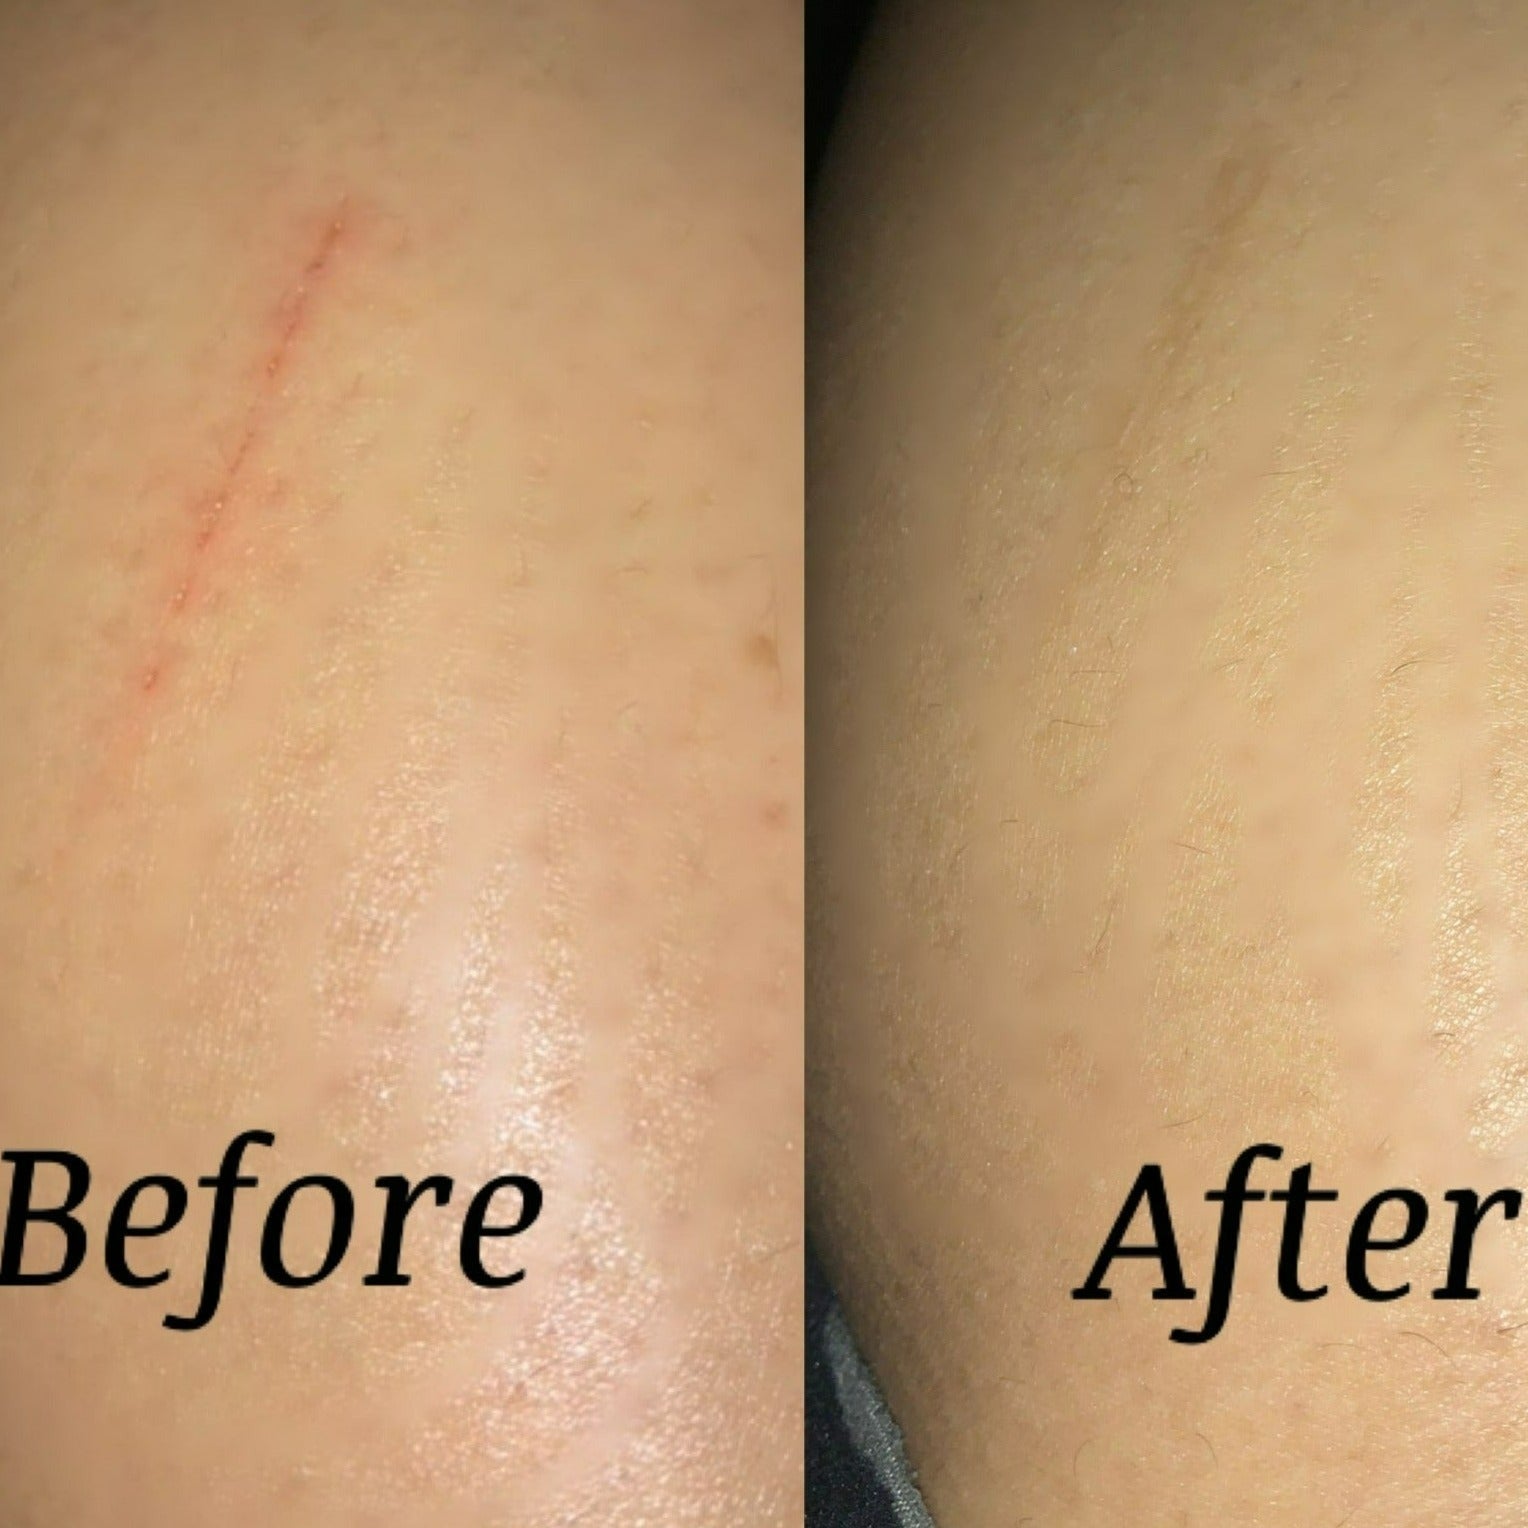 Before & After Cream On Leg